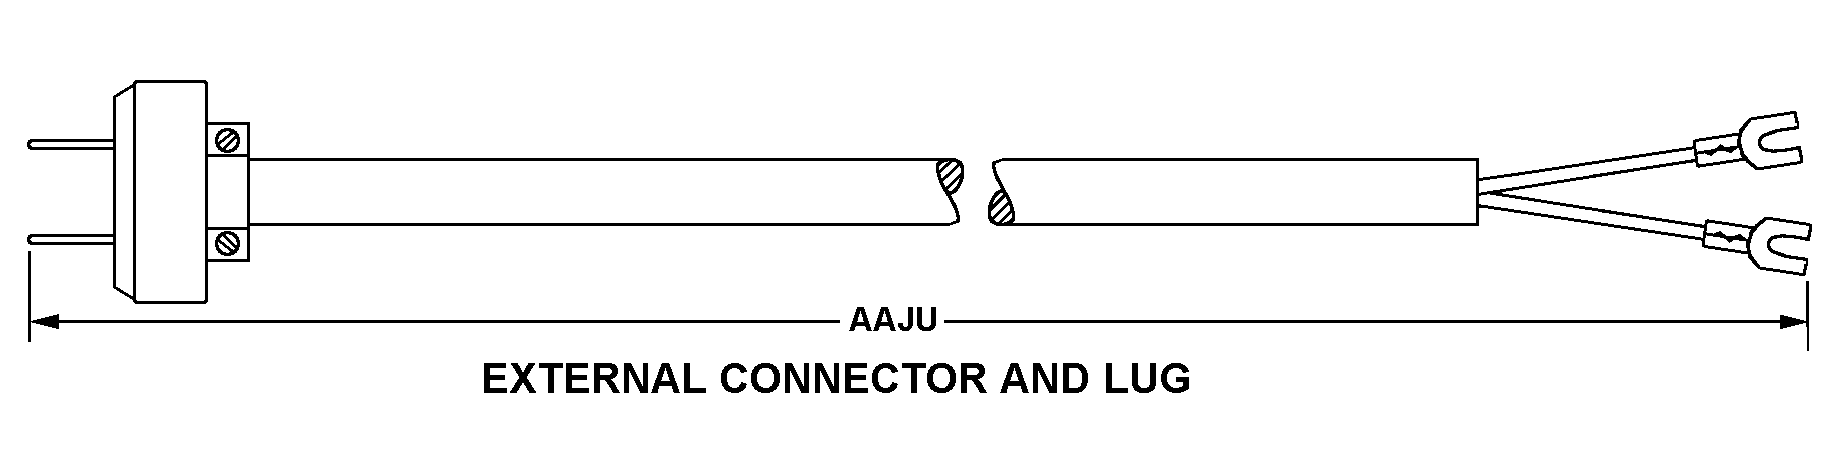 EXTERNAL CONNECTOR AND LUG style nsn 6150-00-221-5122